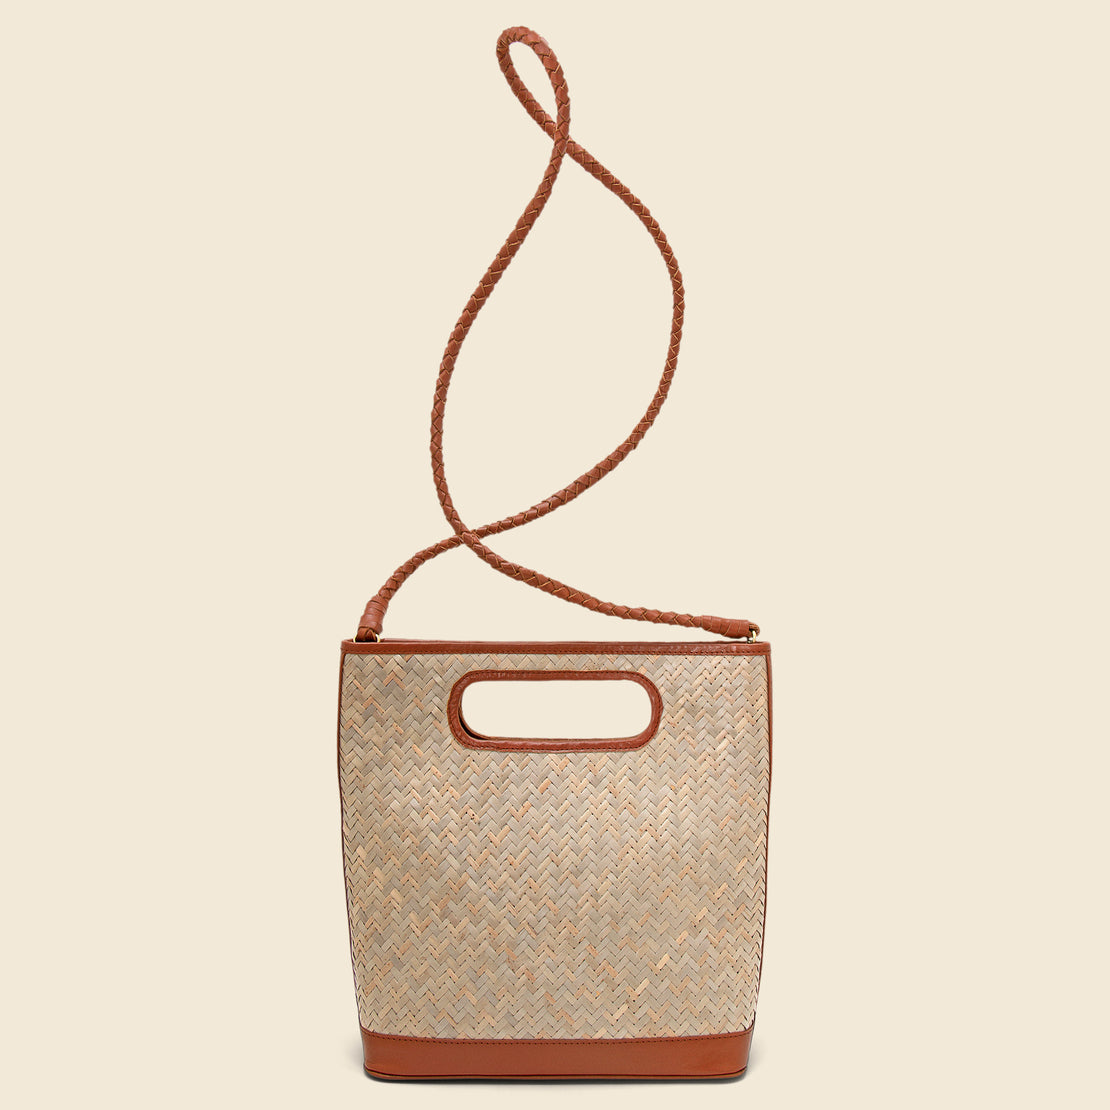 Nell Handbag - Rattan - Bembien - STAG Provisions - W - Accessories - Bag